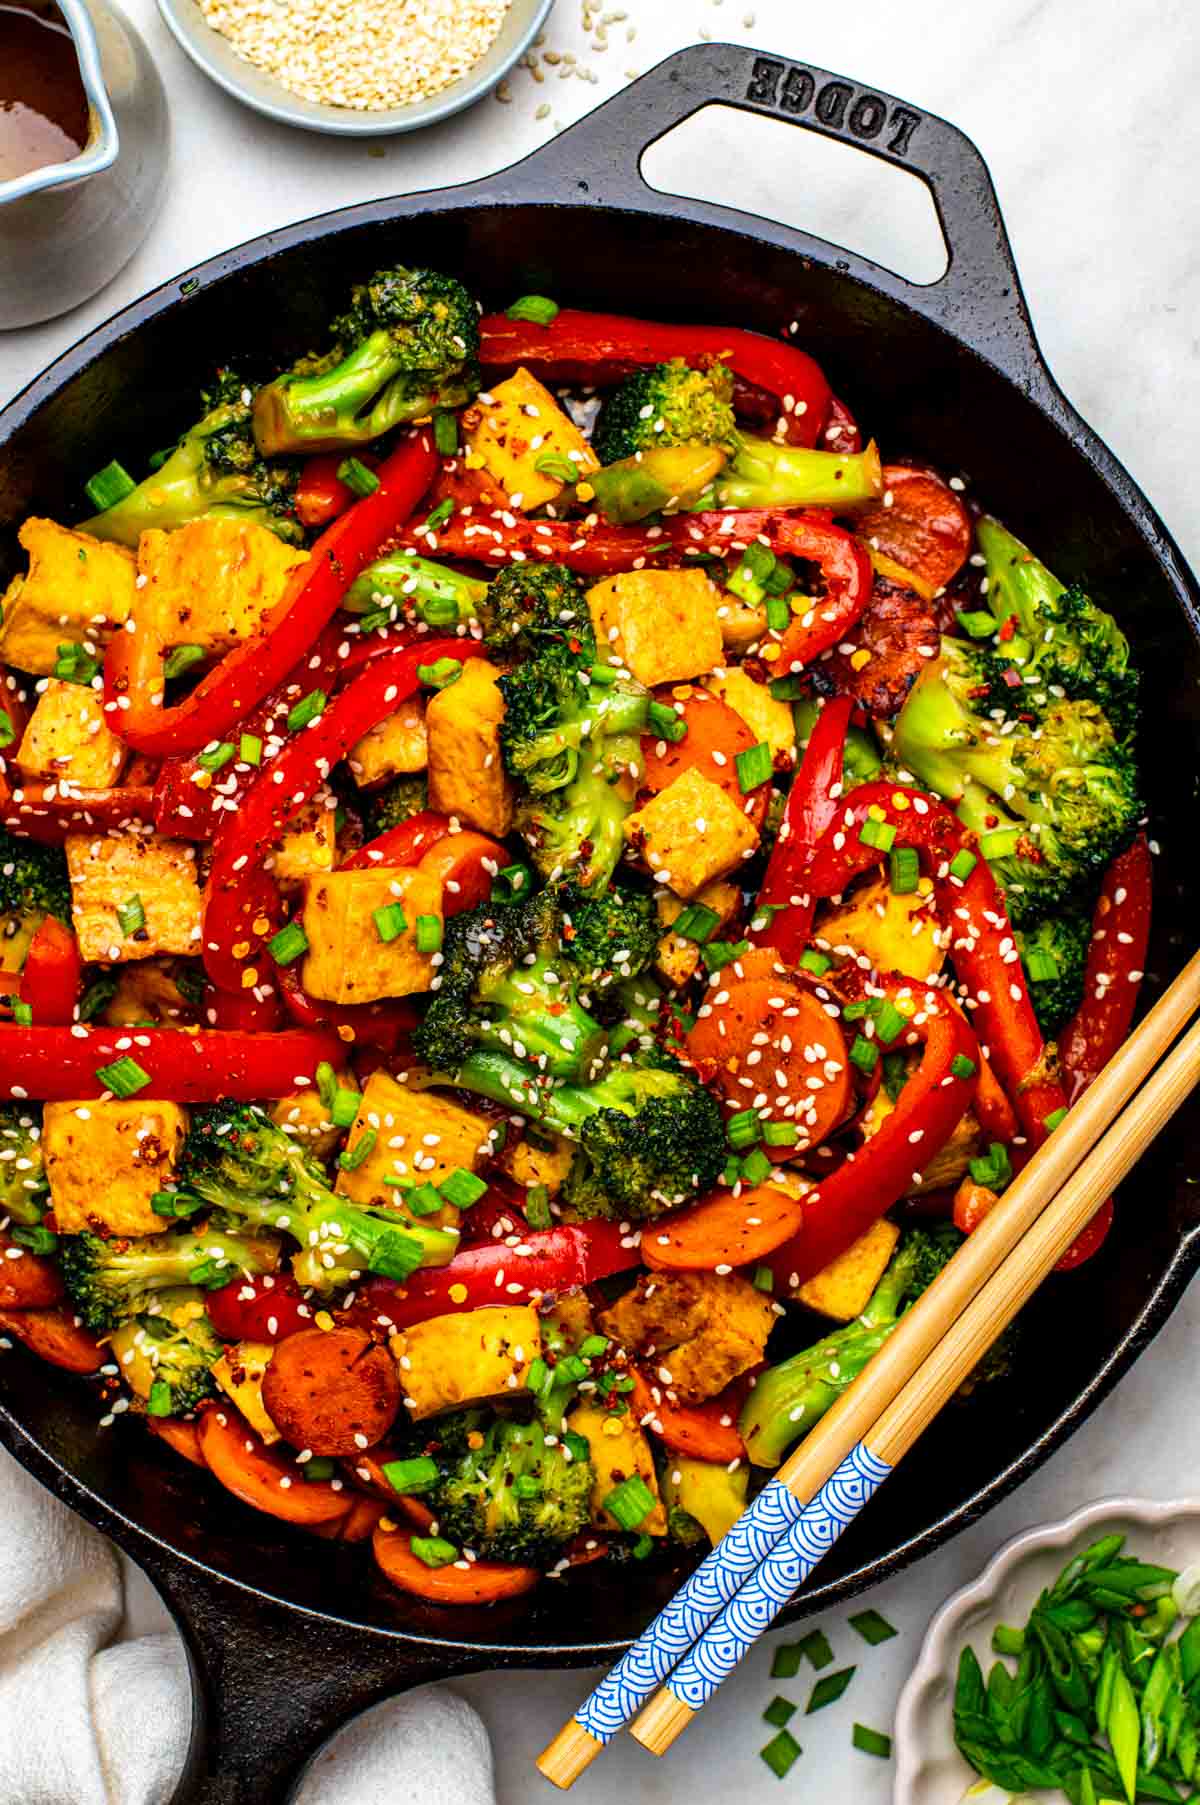 Vegan stir fry in a skillet topped with sesame seeds.